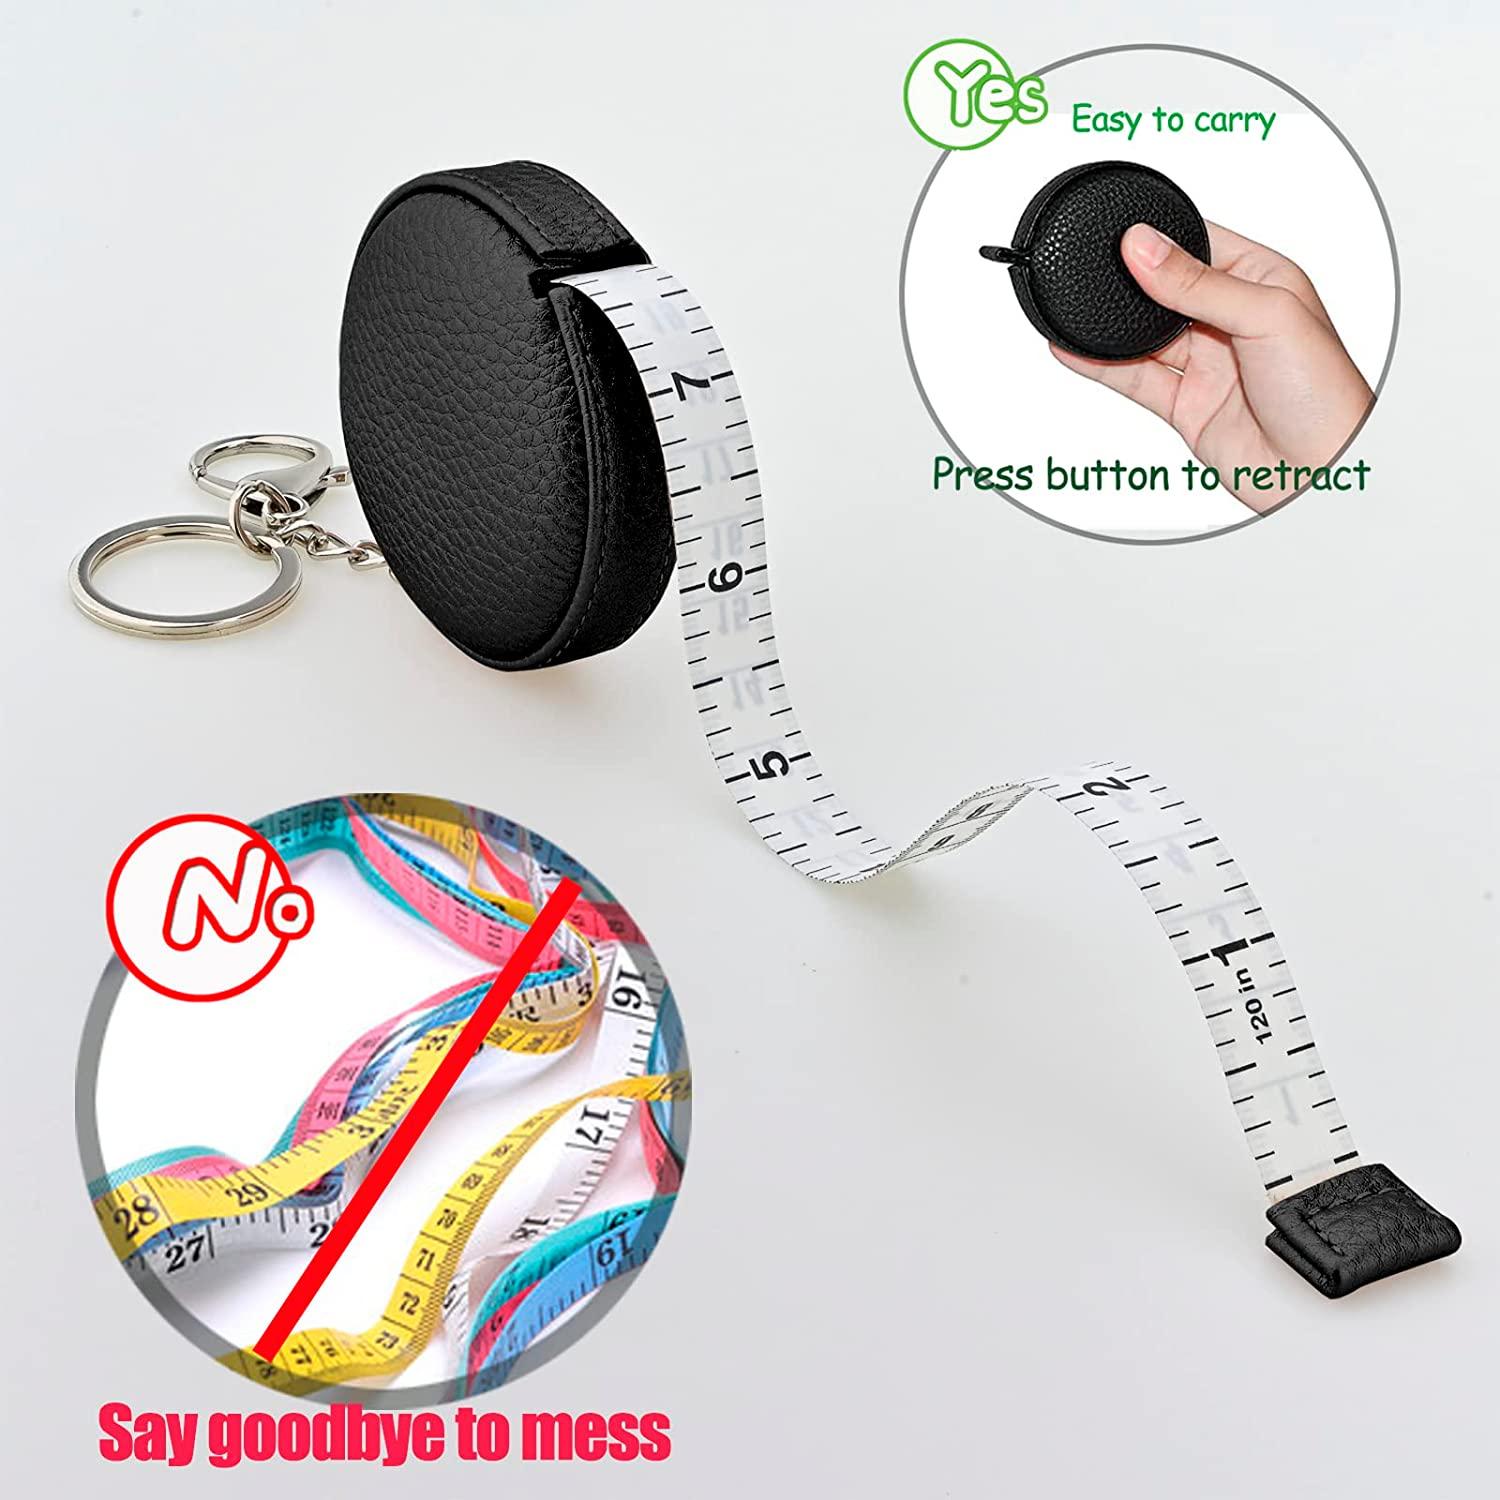 3m/120 Tape Measure Body Measuring Tape for Body Cloth Tape Measure for  Sewing Fabric Tailors Medical Measurements Tape Dual Sided Leather Tape